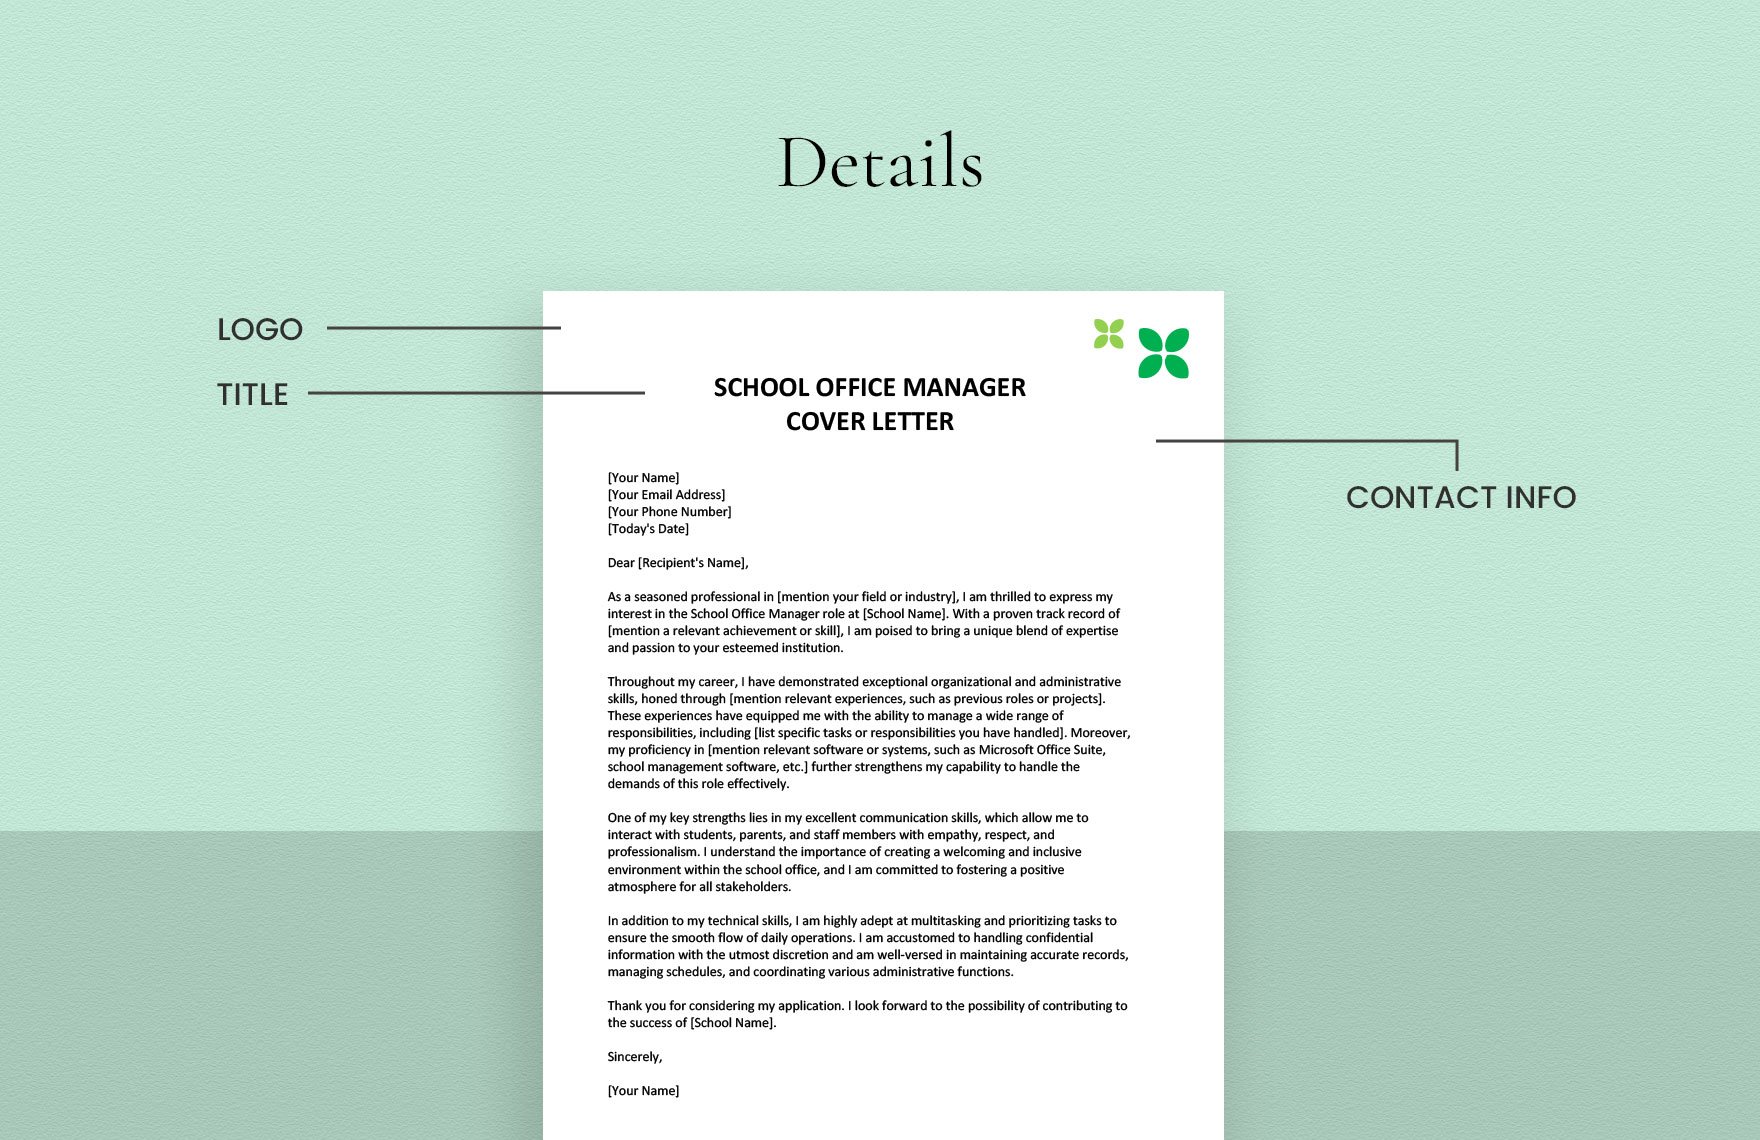 School Office Manager Cover Letter